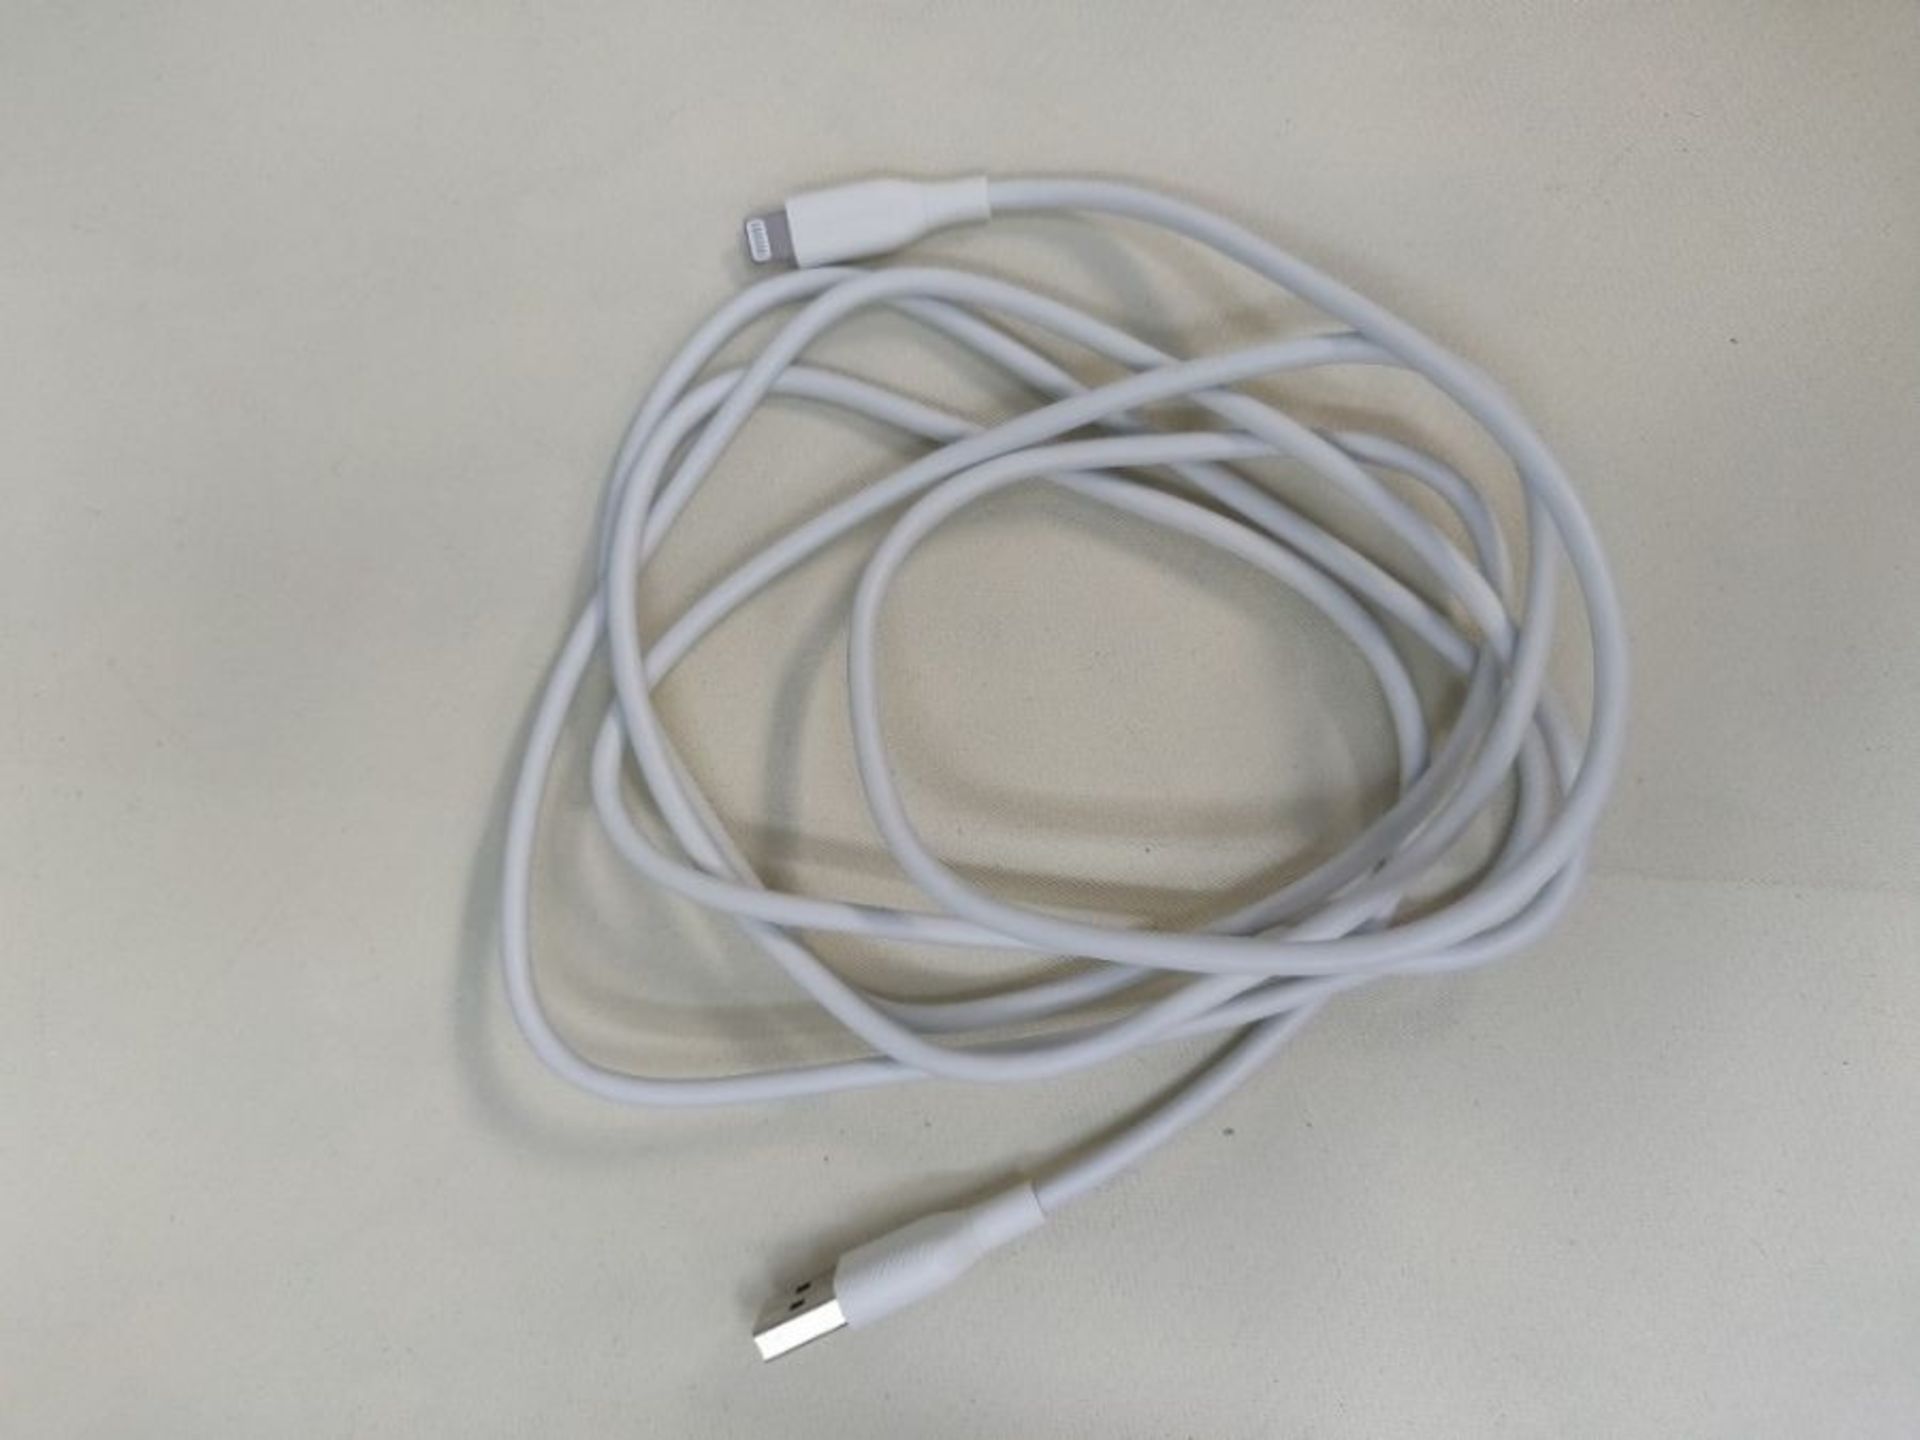 Amazon Basics Lightning to USB A Cable - MFi Certified iPhone Charger, White, 1.82 m - Image 2 of 2